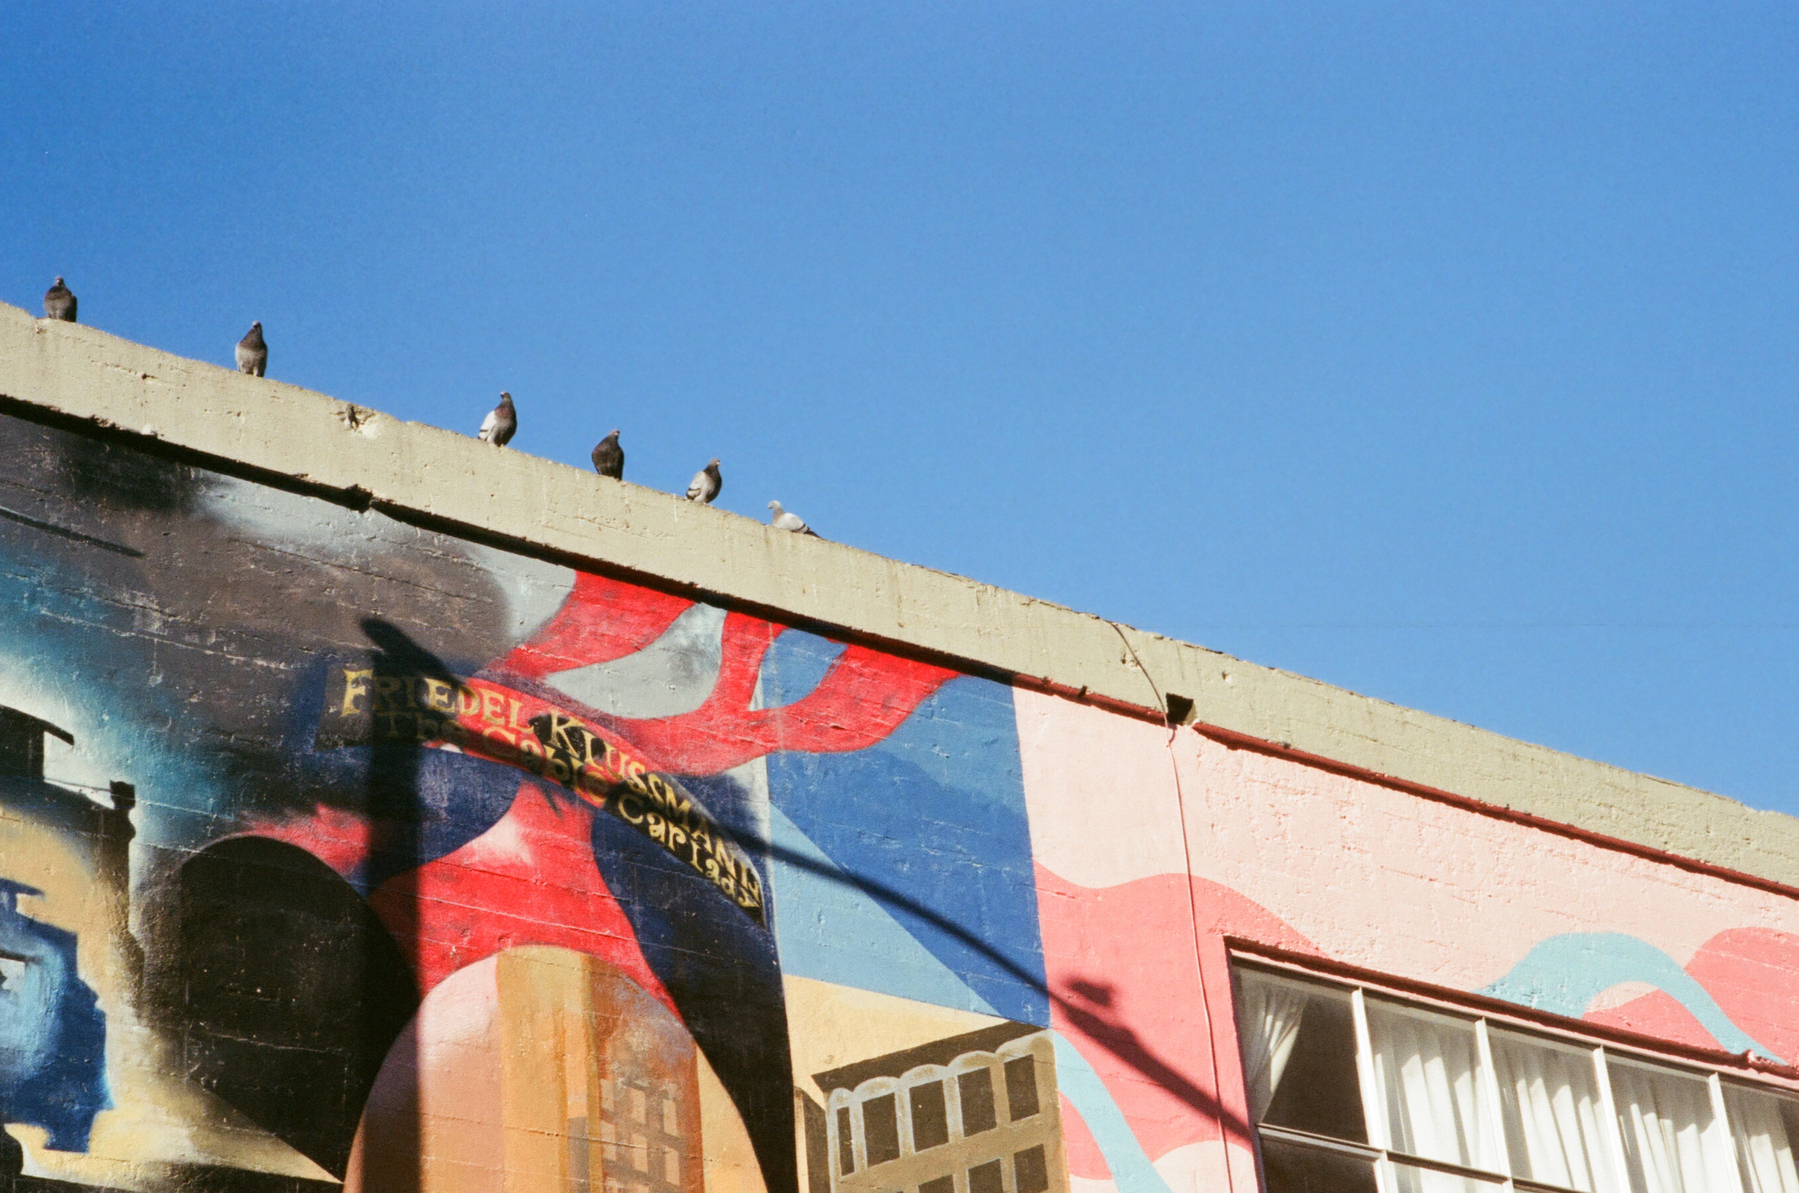 a color photograph of pigeons sitting on a building roof. Blue skies in background. Building has colorful murals on it.